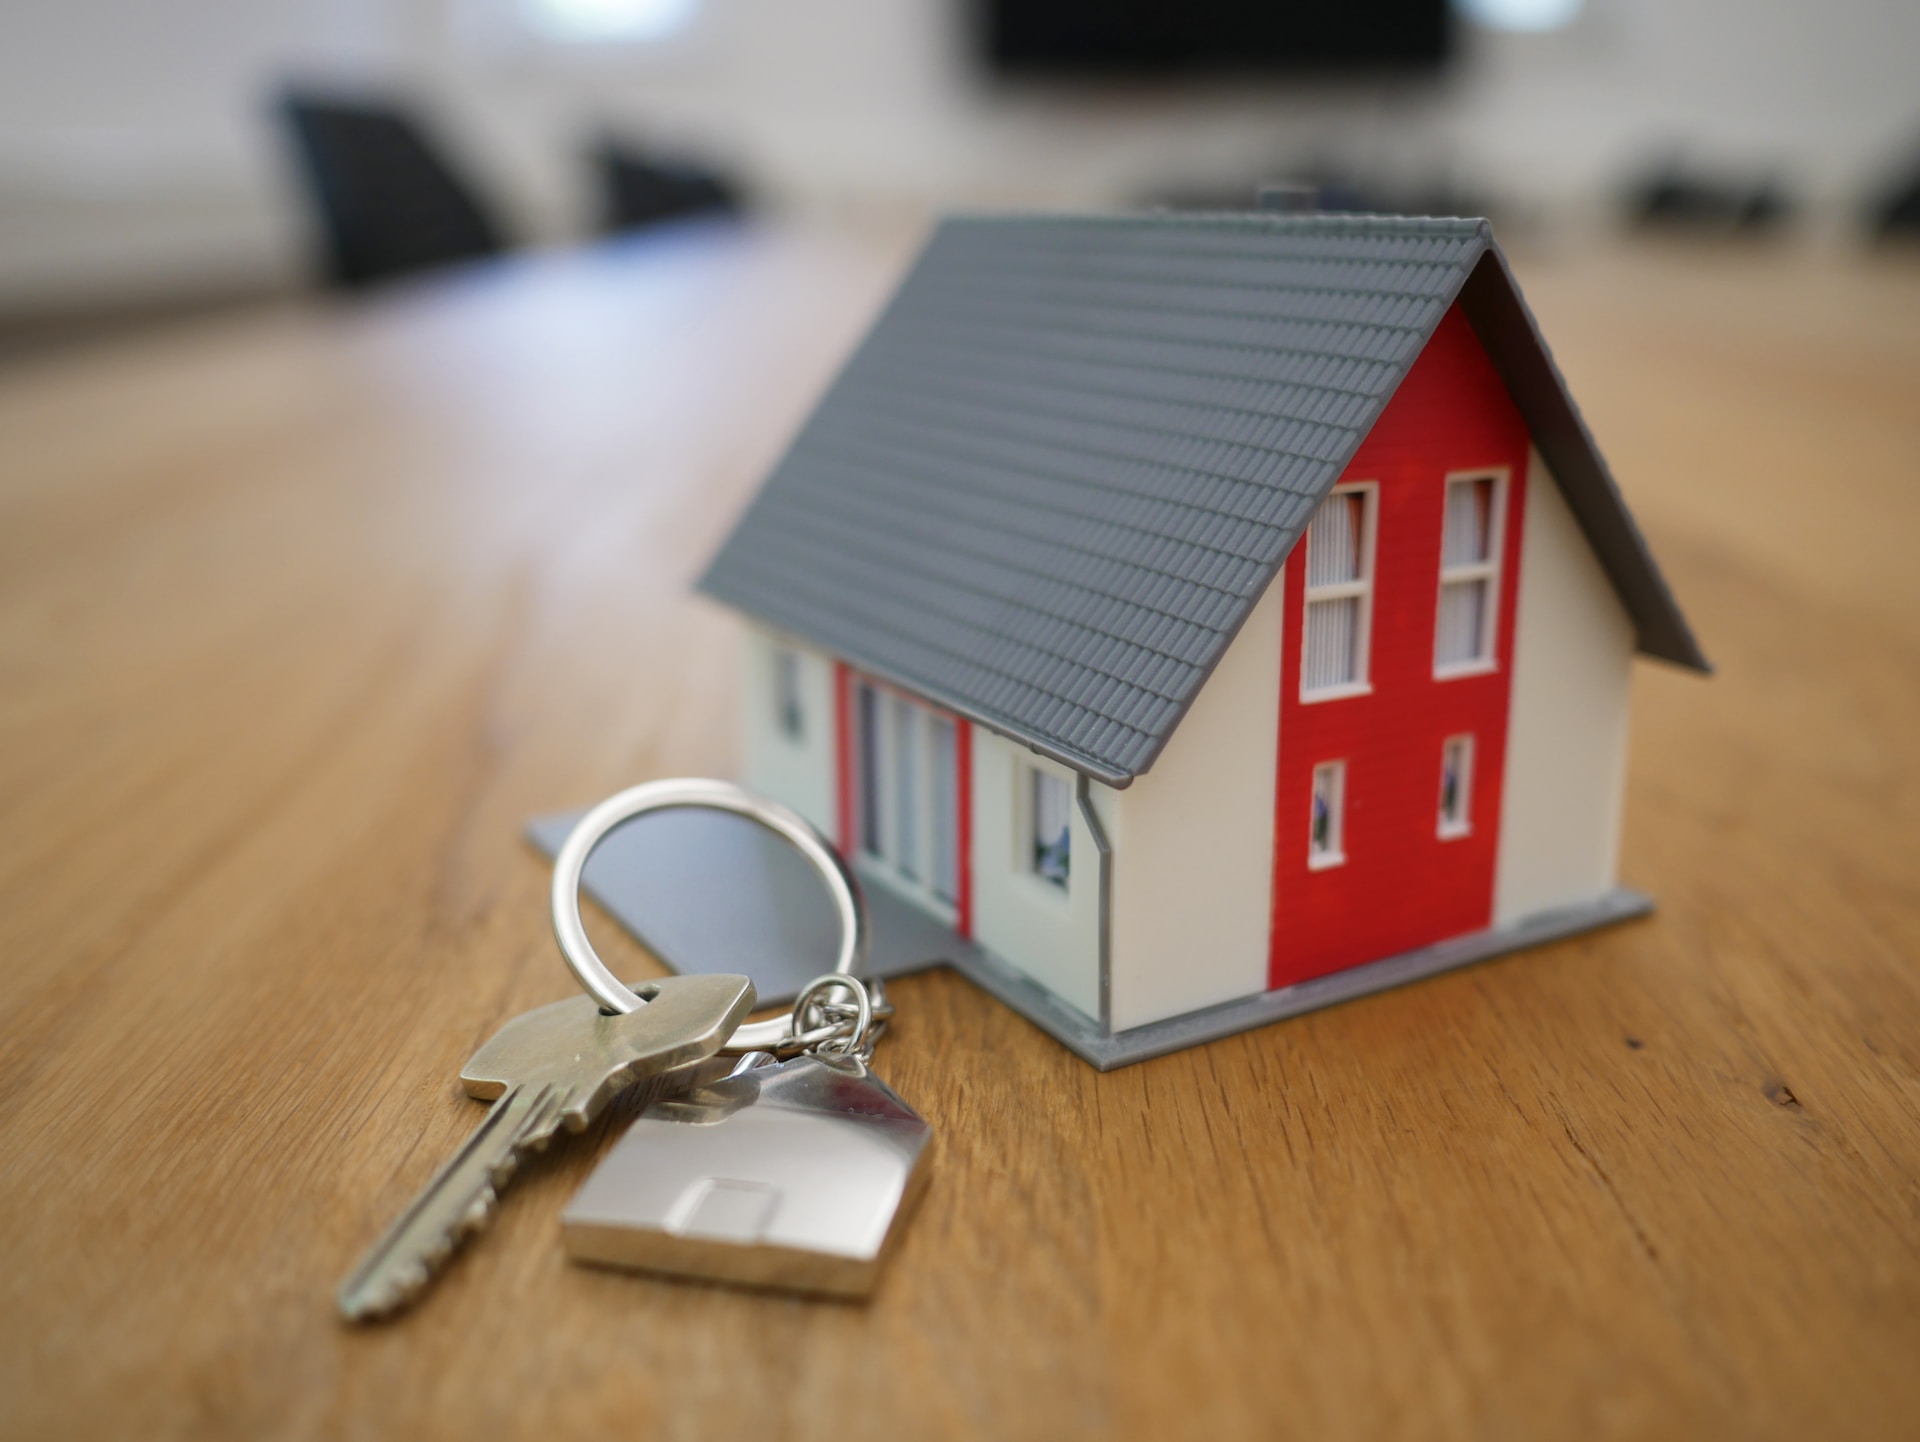 A set of house keys sat next to a similar sized miniature house model, on top of a wooden table.